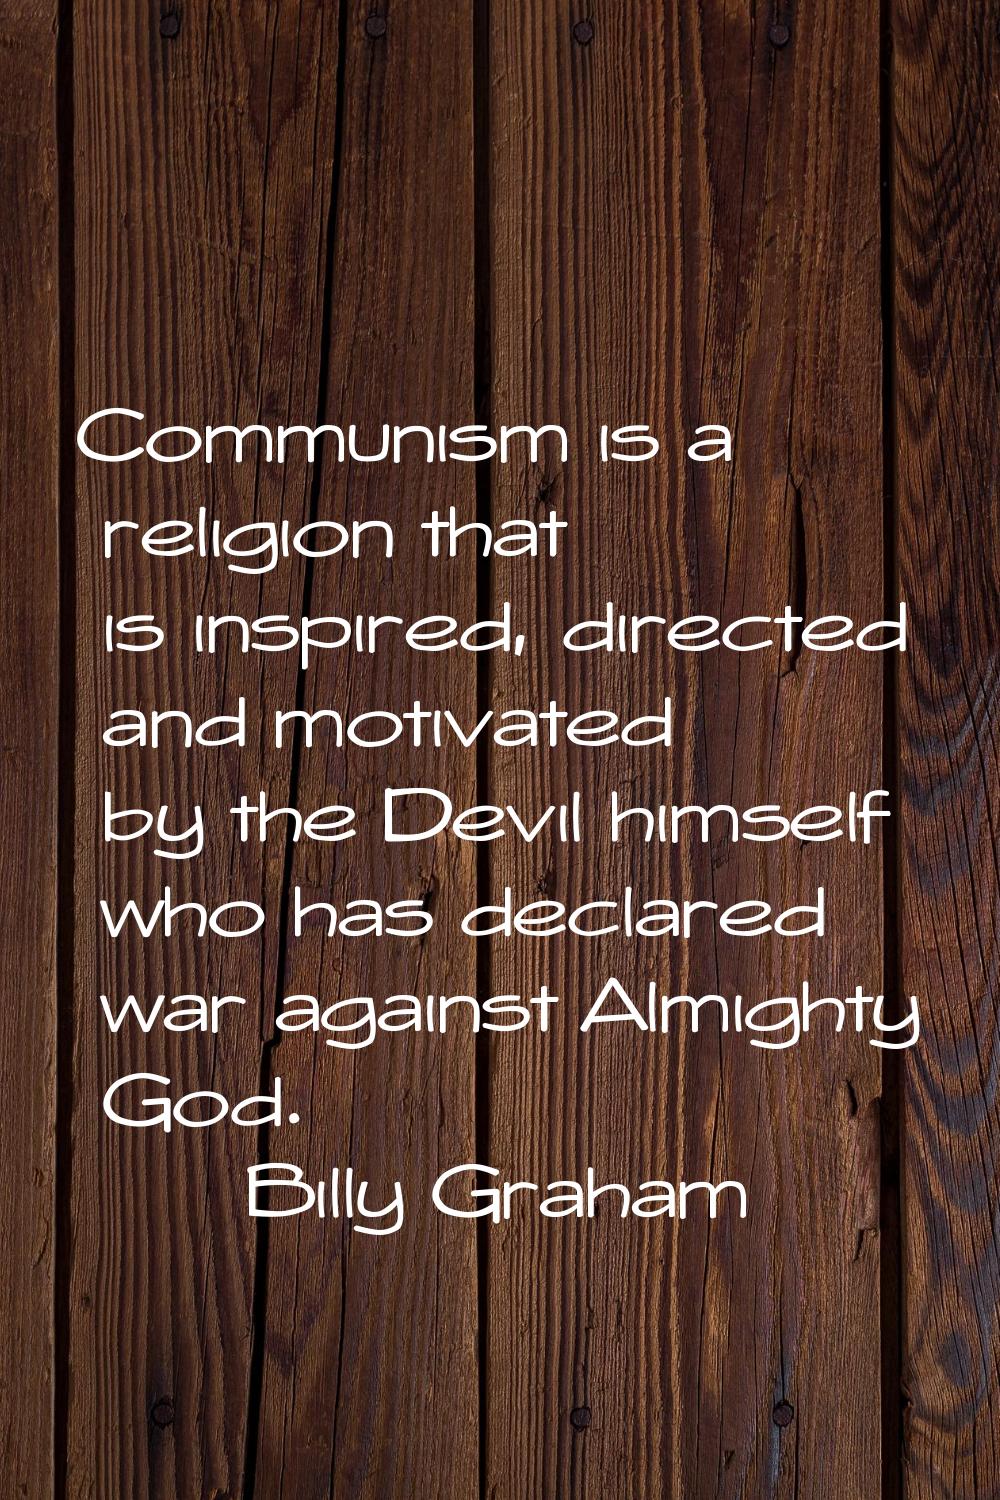 Communism is a religion that is inspired, directed and motivated by the Devil himself who has decla